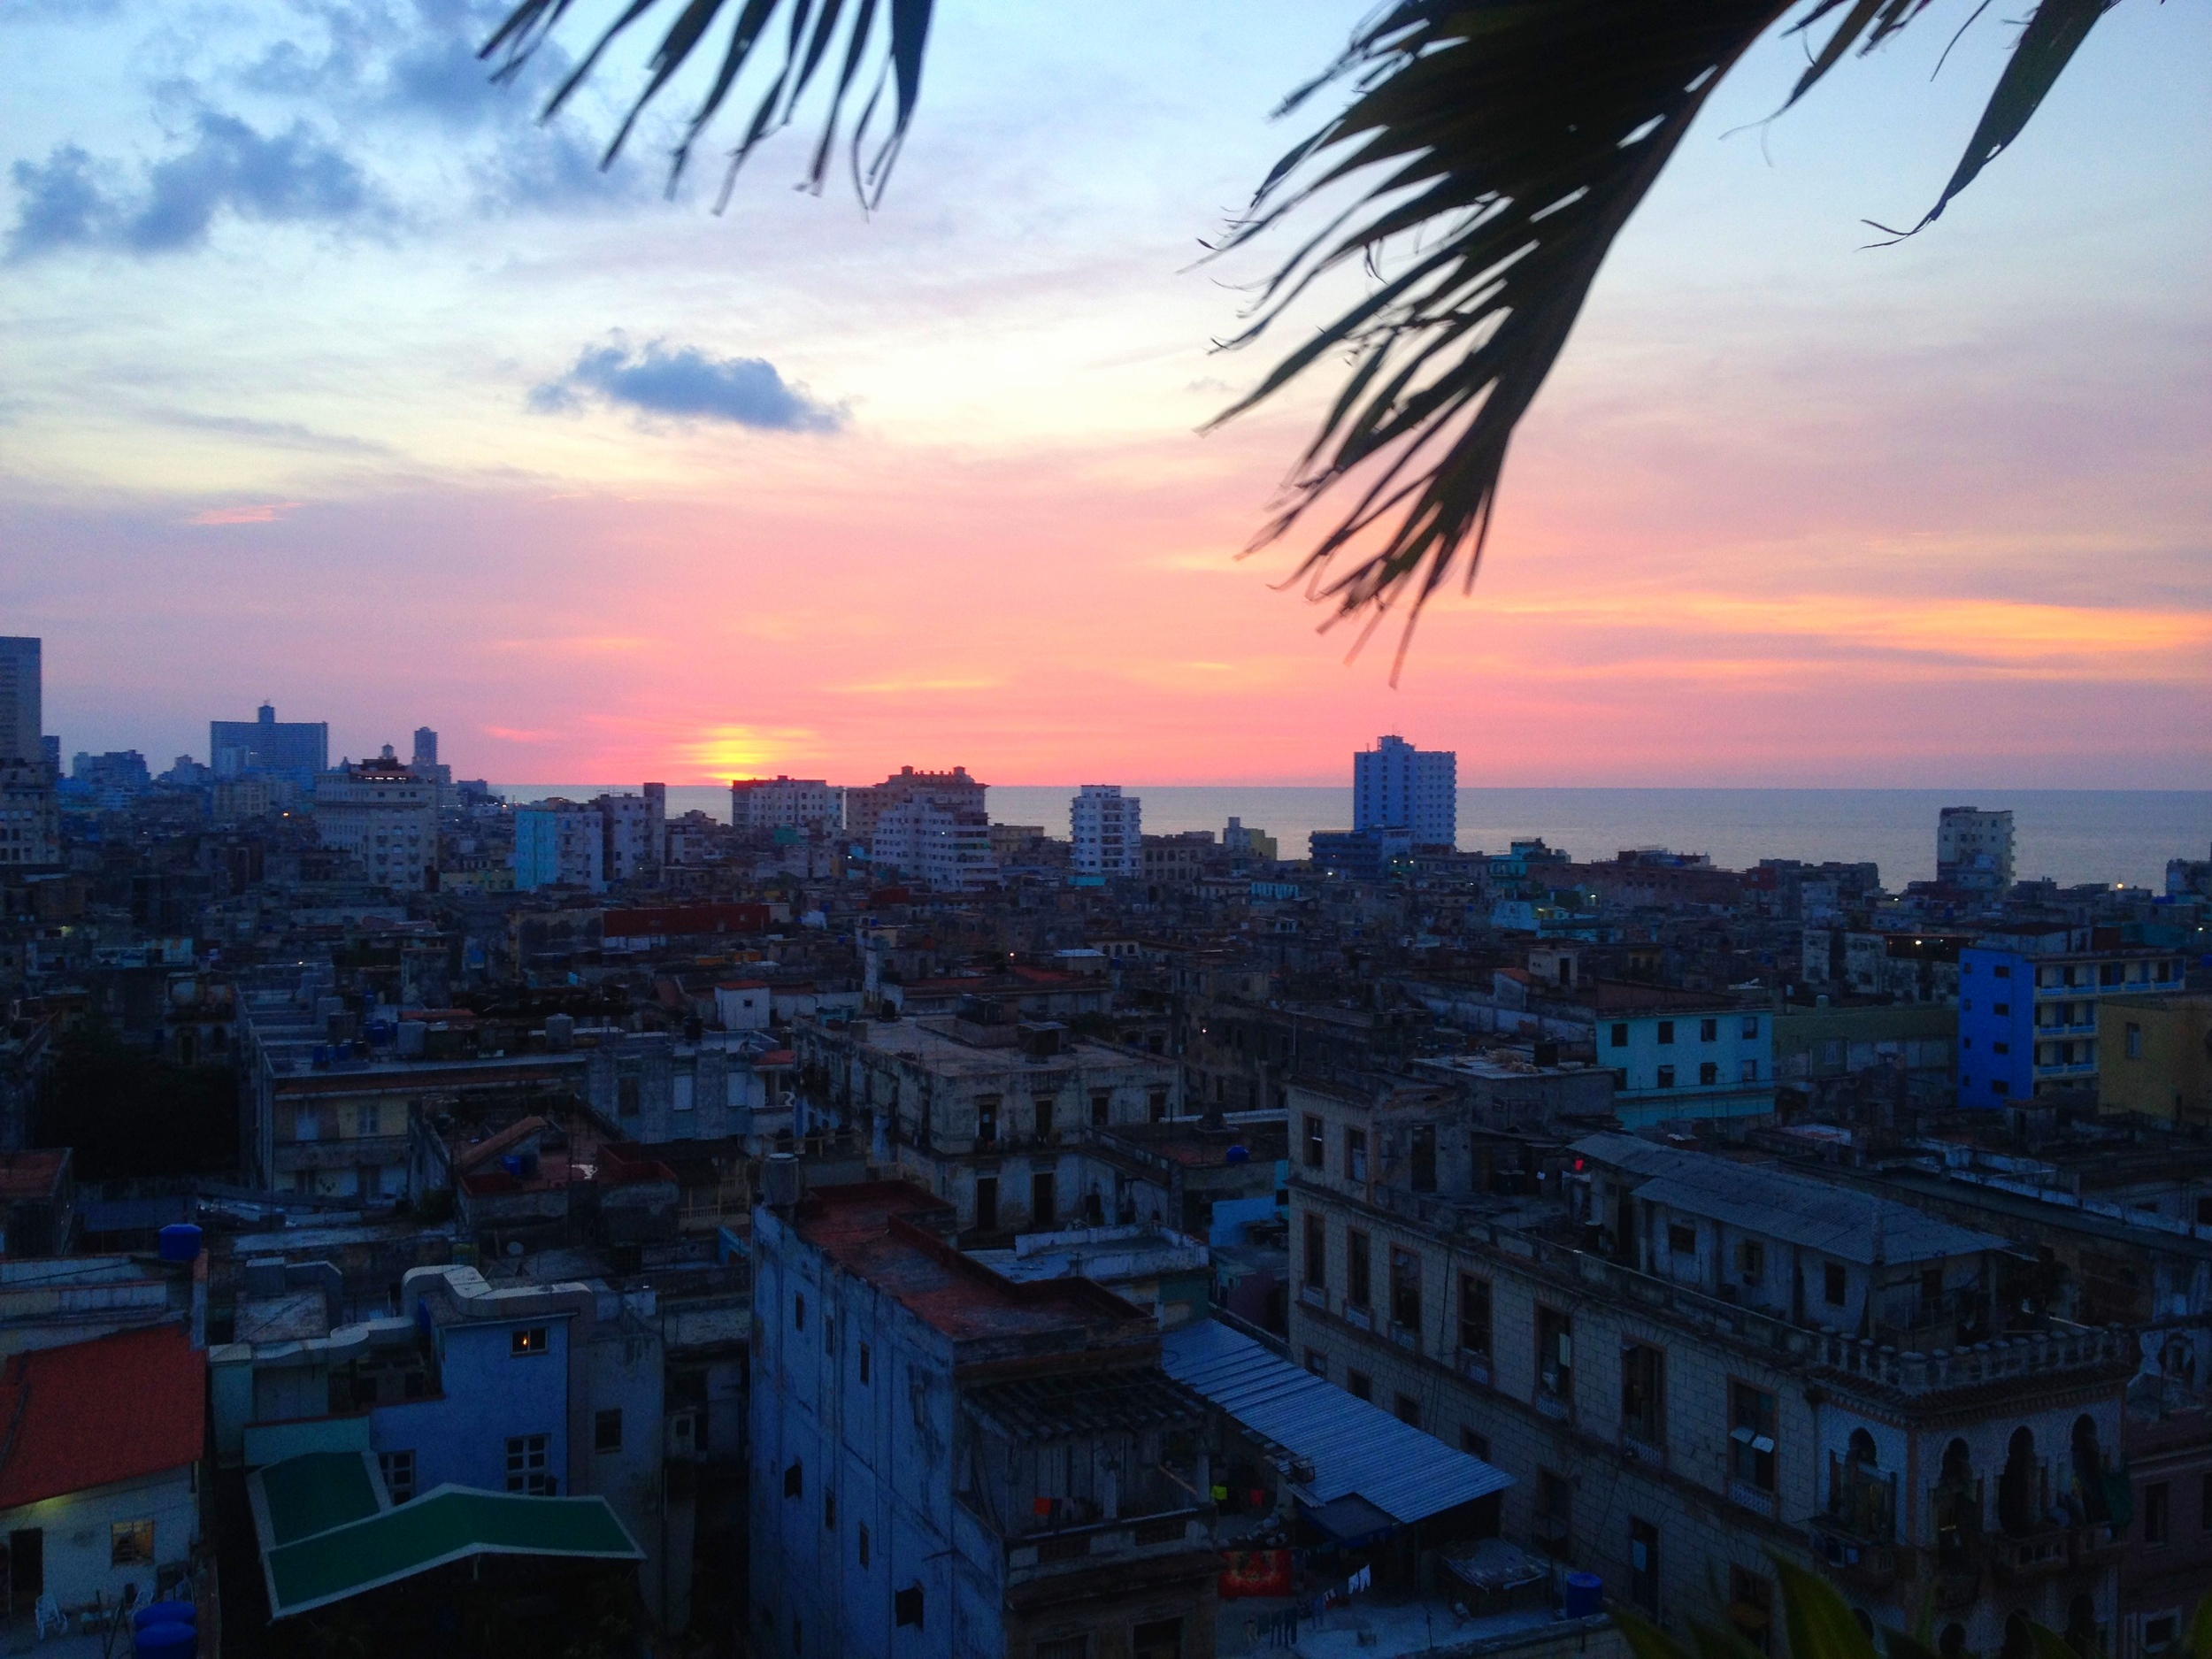  Sunset view from the roof top of the Parque Central Hotel in Old Havana. 